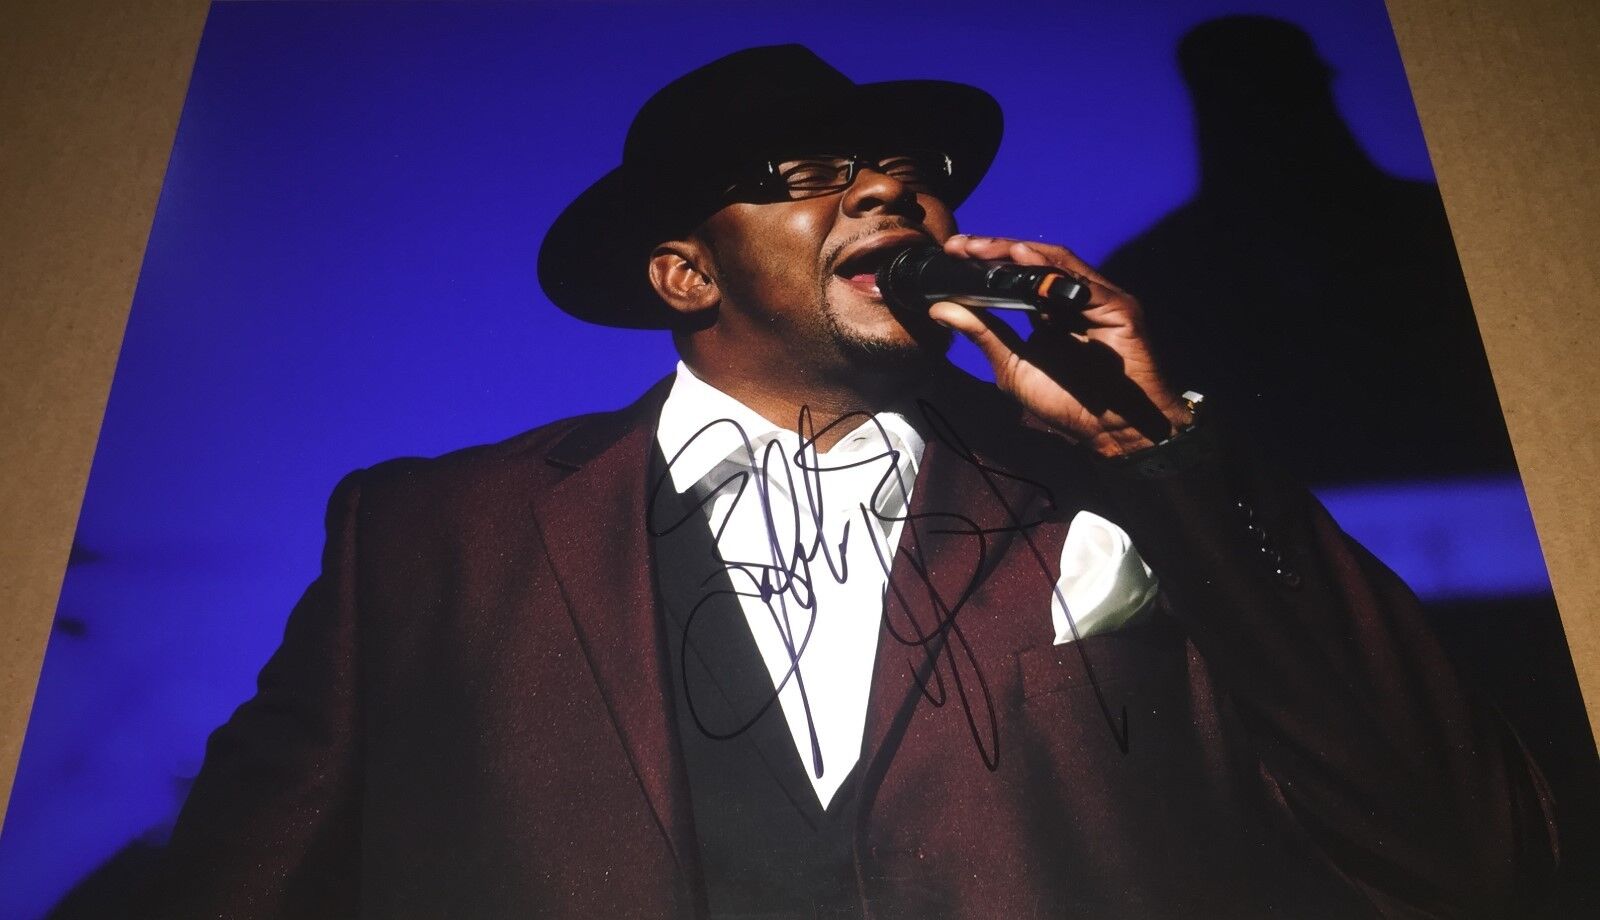 Bobby Brown Singer New Edition Signed 11x14 Photo Autographed Don't Be Cruel